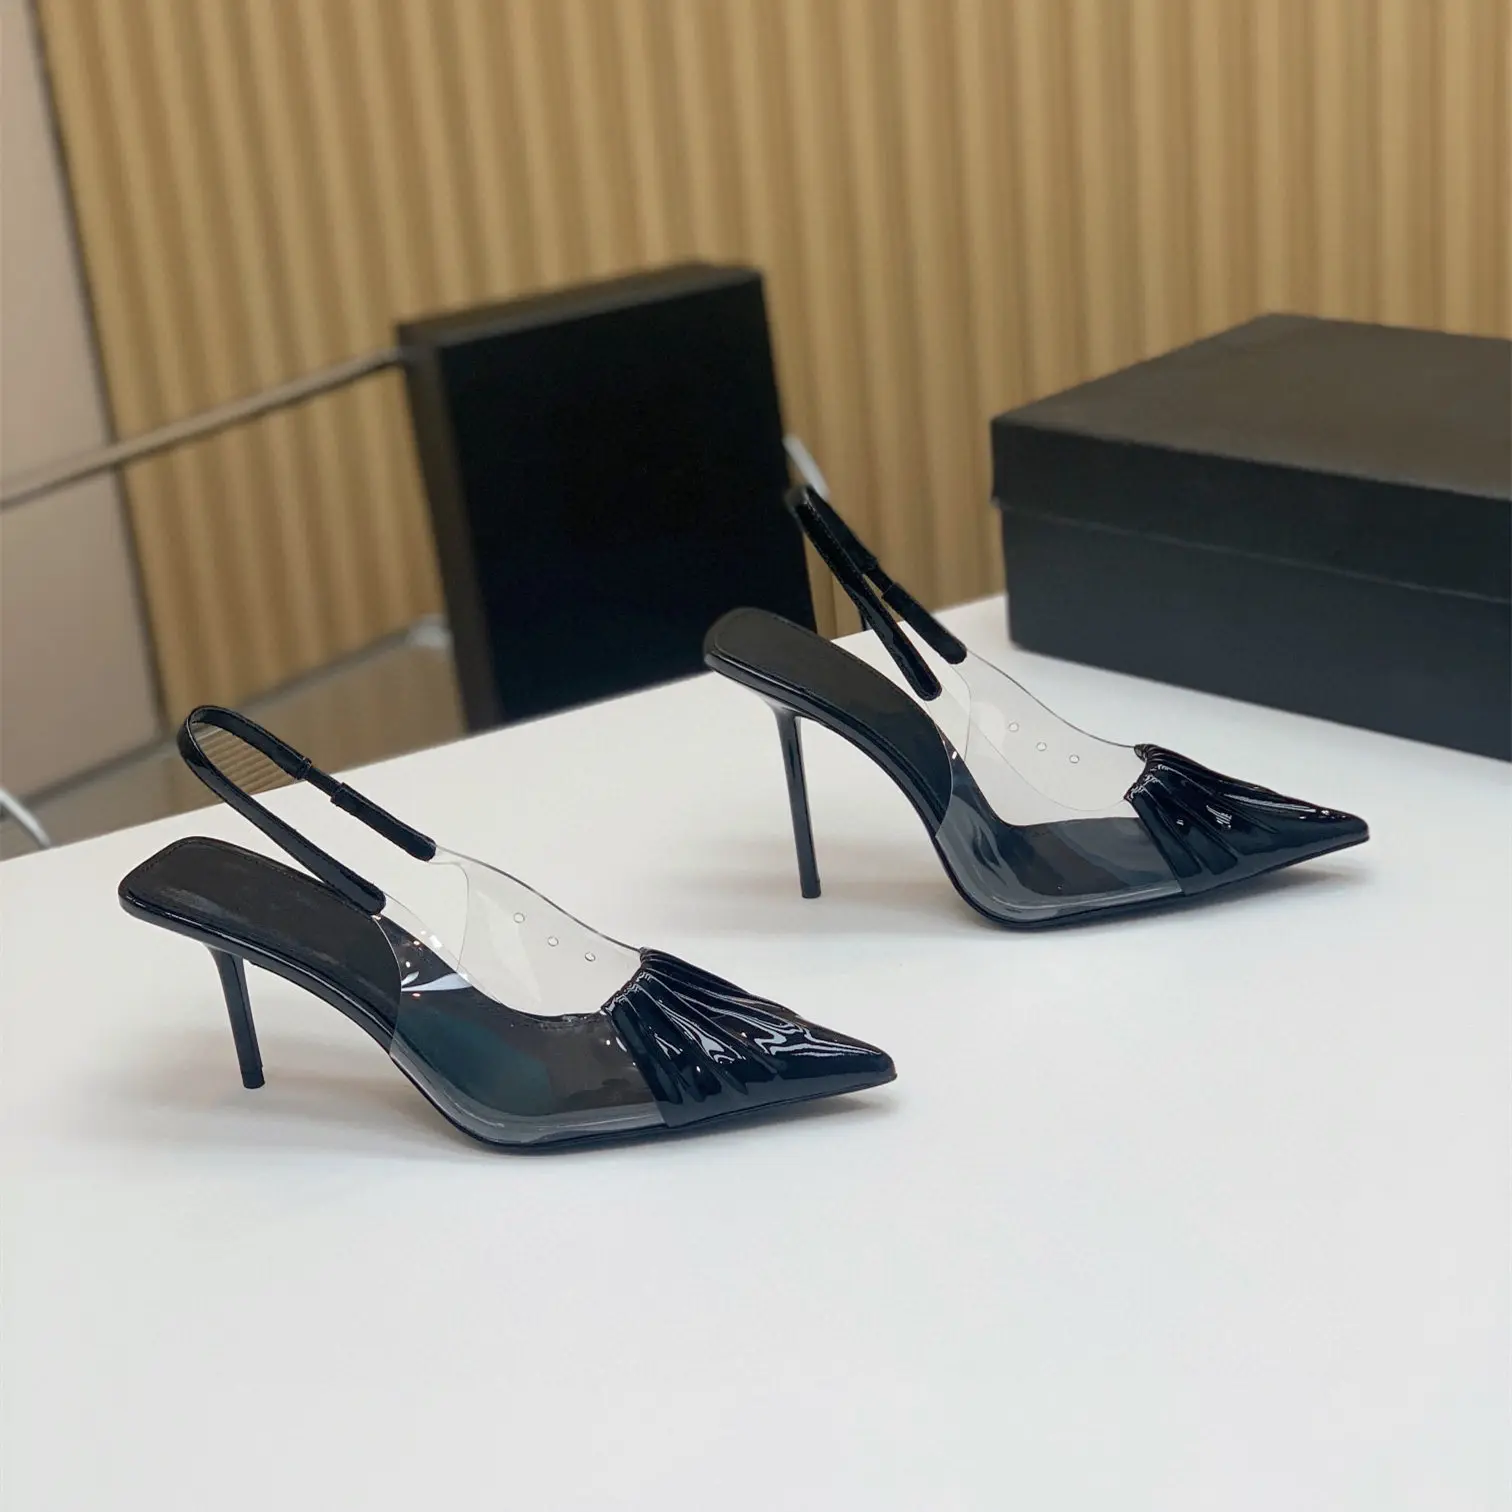 

Casual Designer Lady Fashion Women Shoes Black Leather Pvc Clear Pointy Toe Stiletto Stripper High Heels Slingback Prom Evening